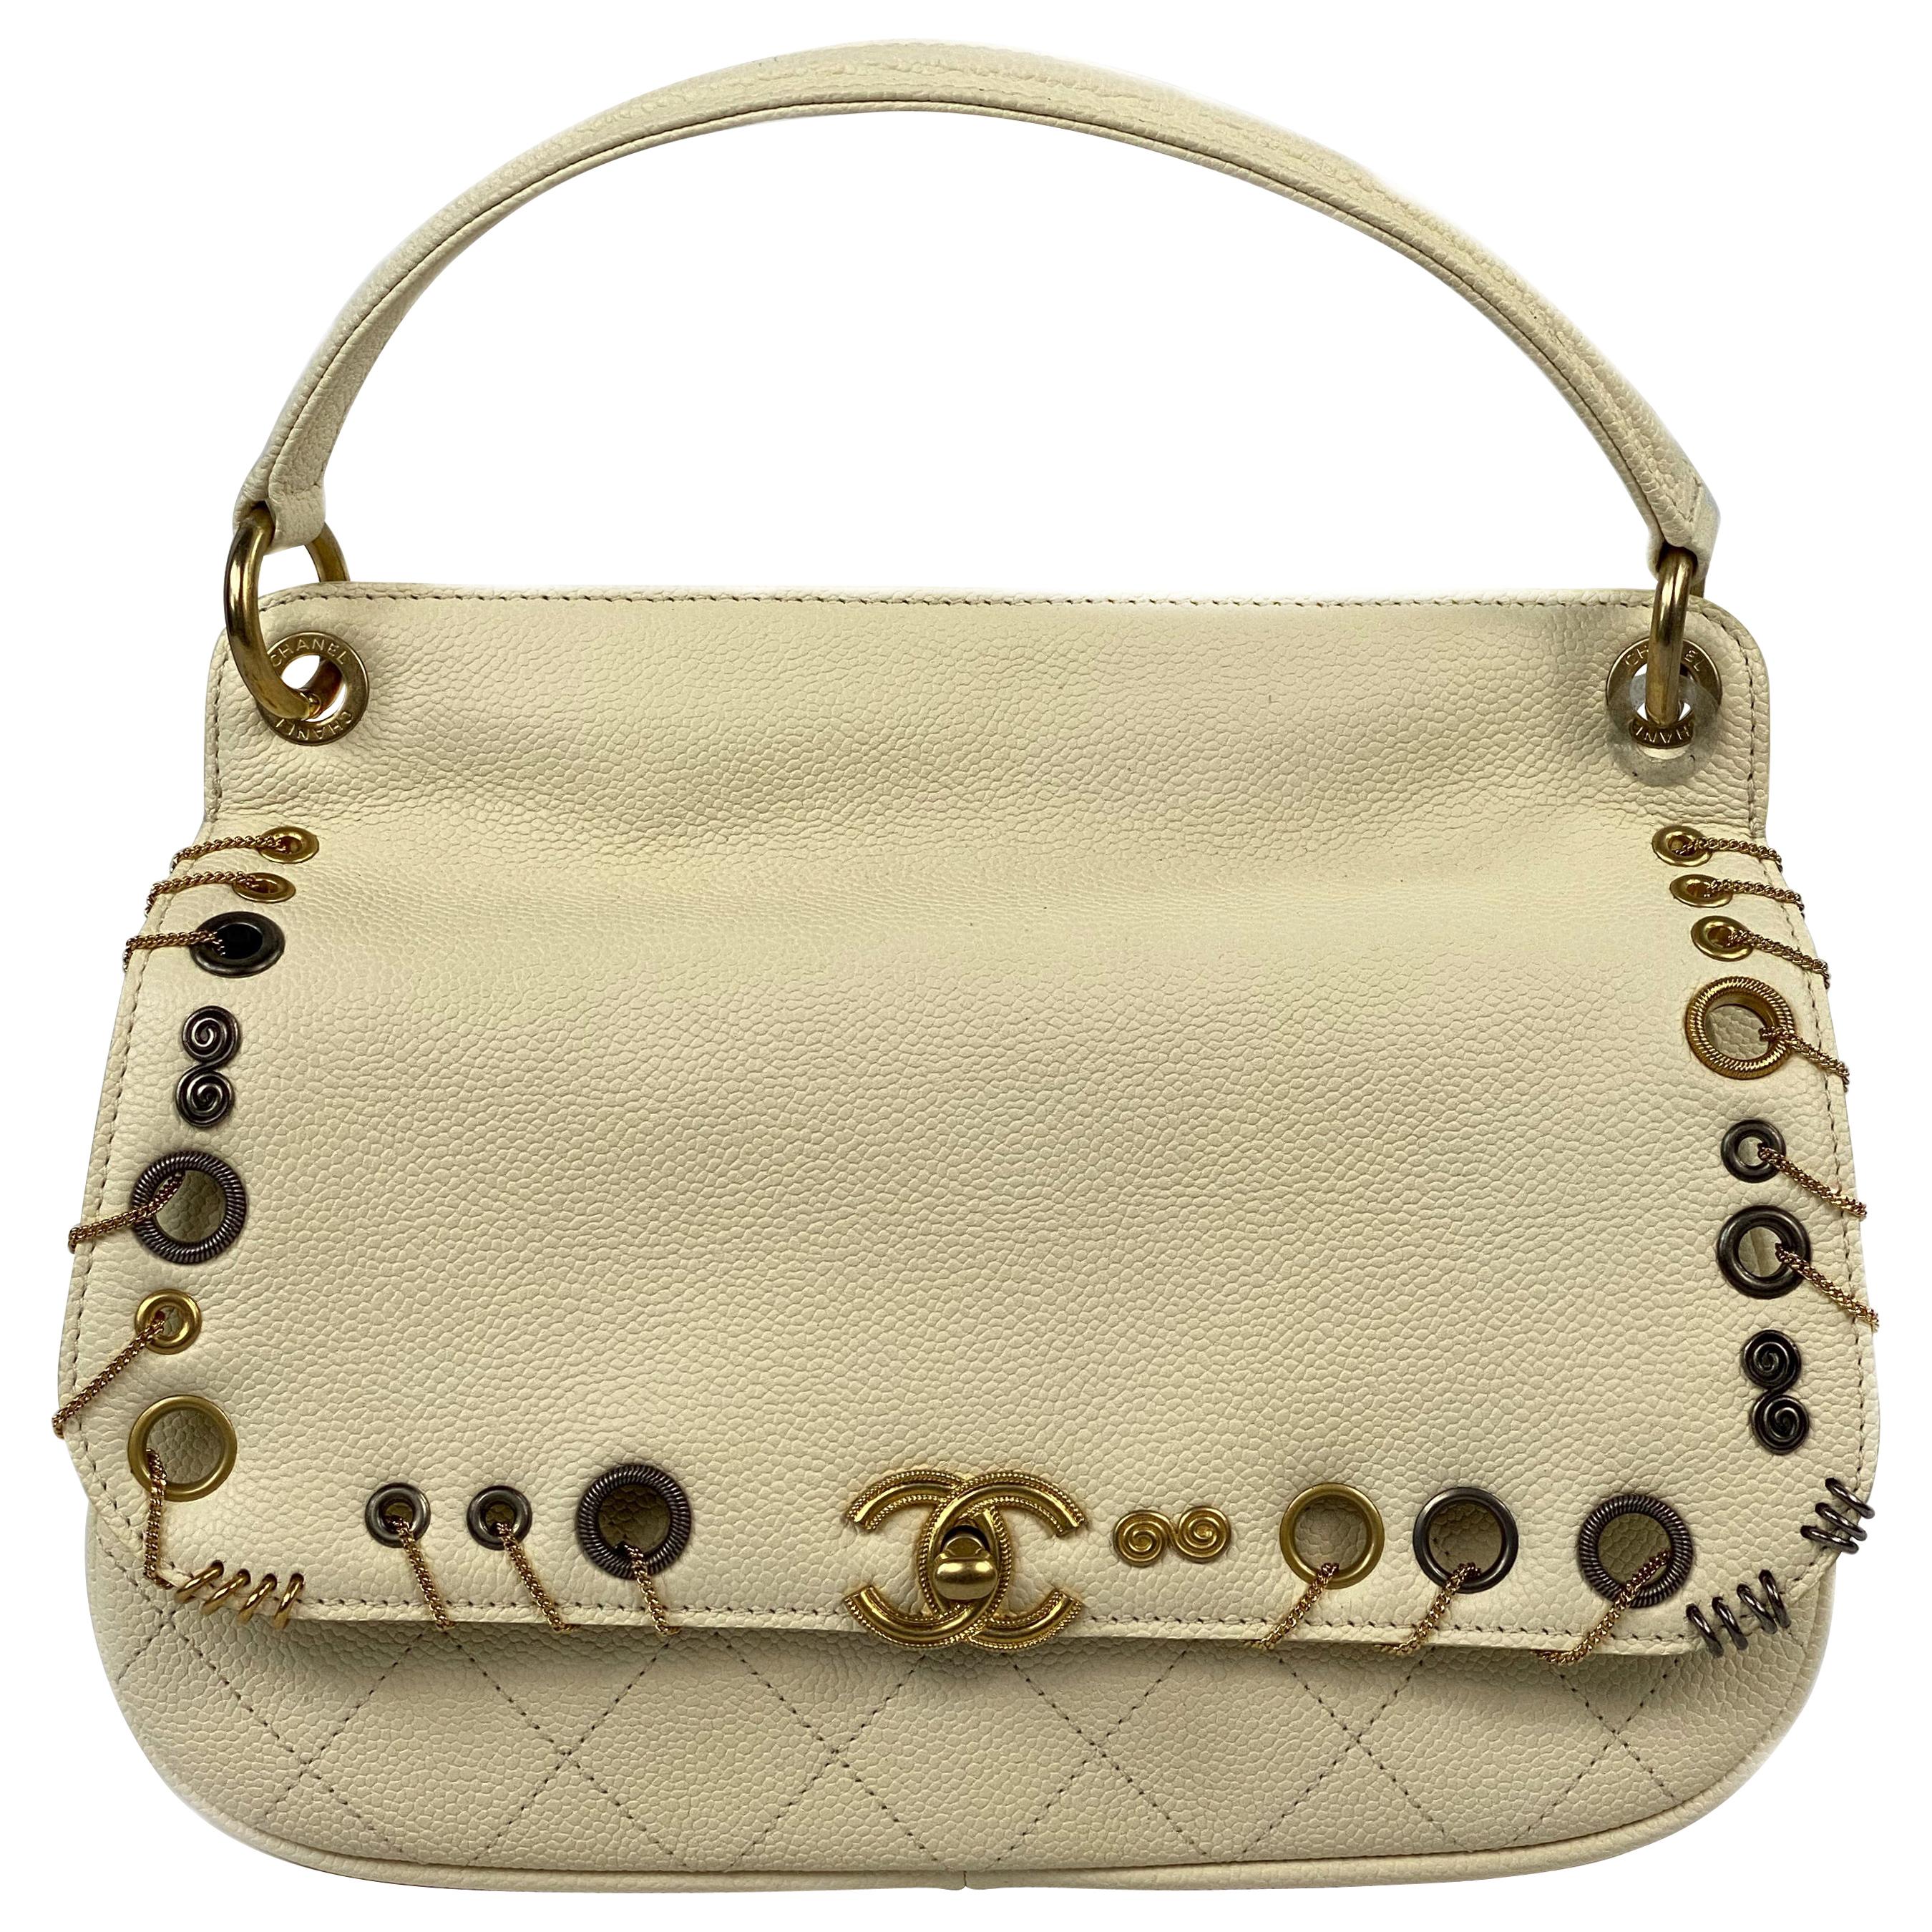 CHANEL Cream/ Ivory Caviar Quilted Grommet Embellished Piercing Flap Bag